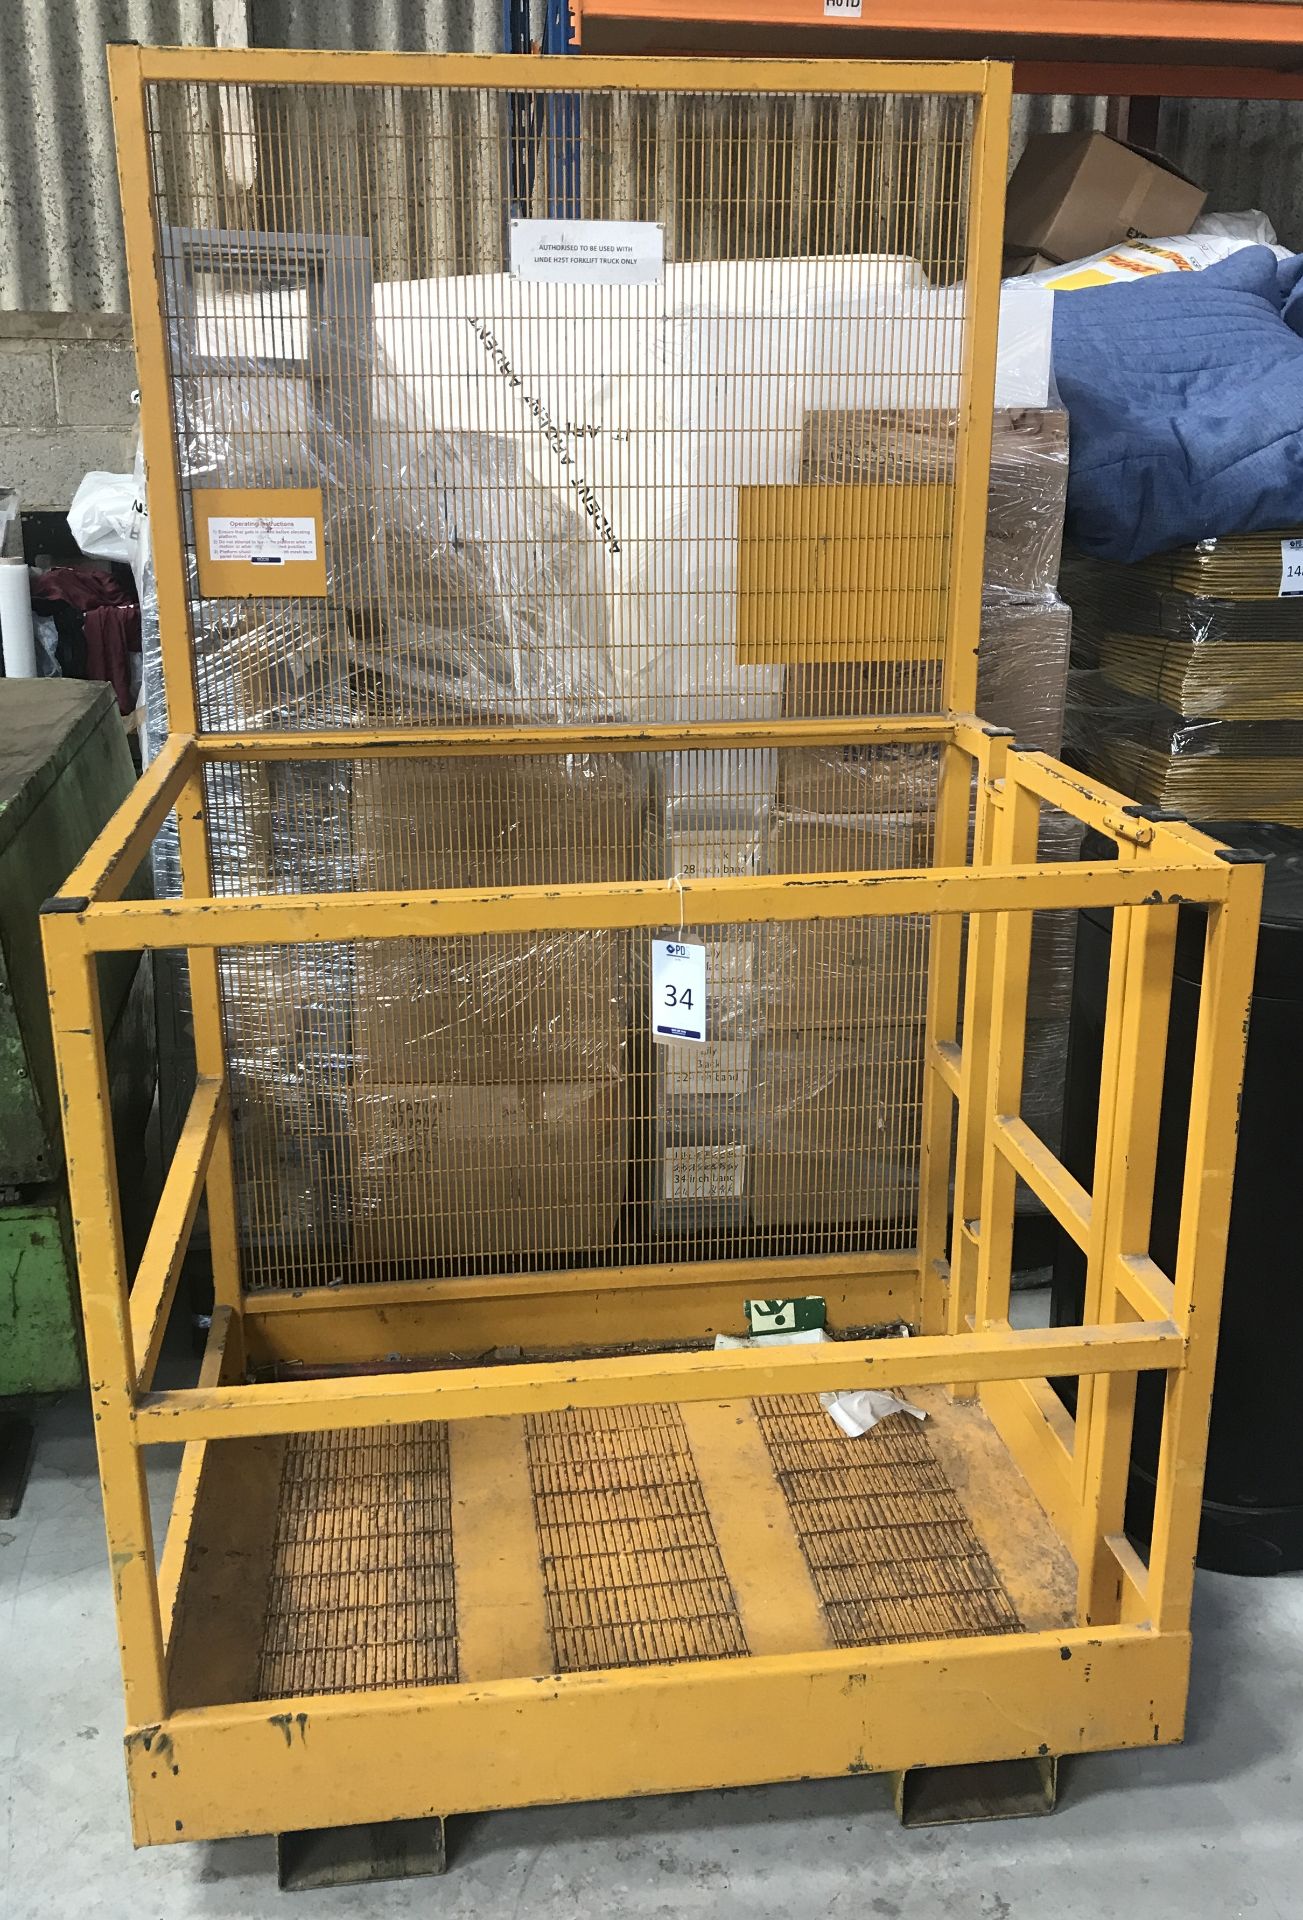 Euroquip Forklift Safety Cage (Location: Brentwood. Please Refer to General Notes)